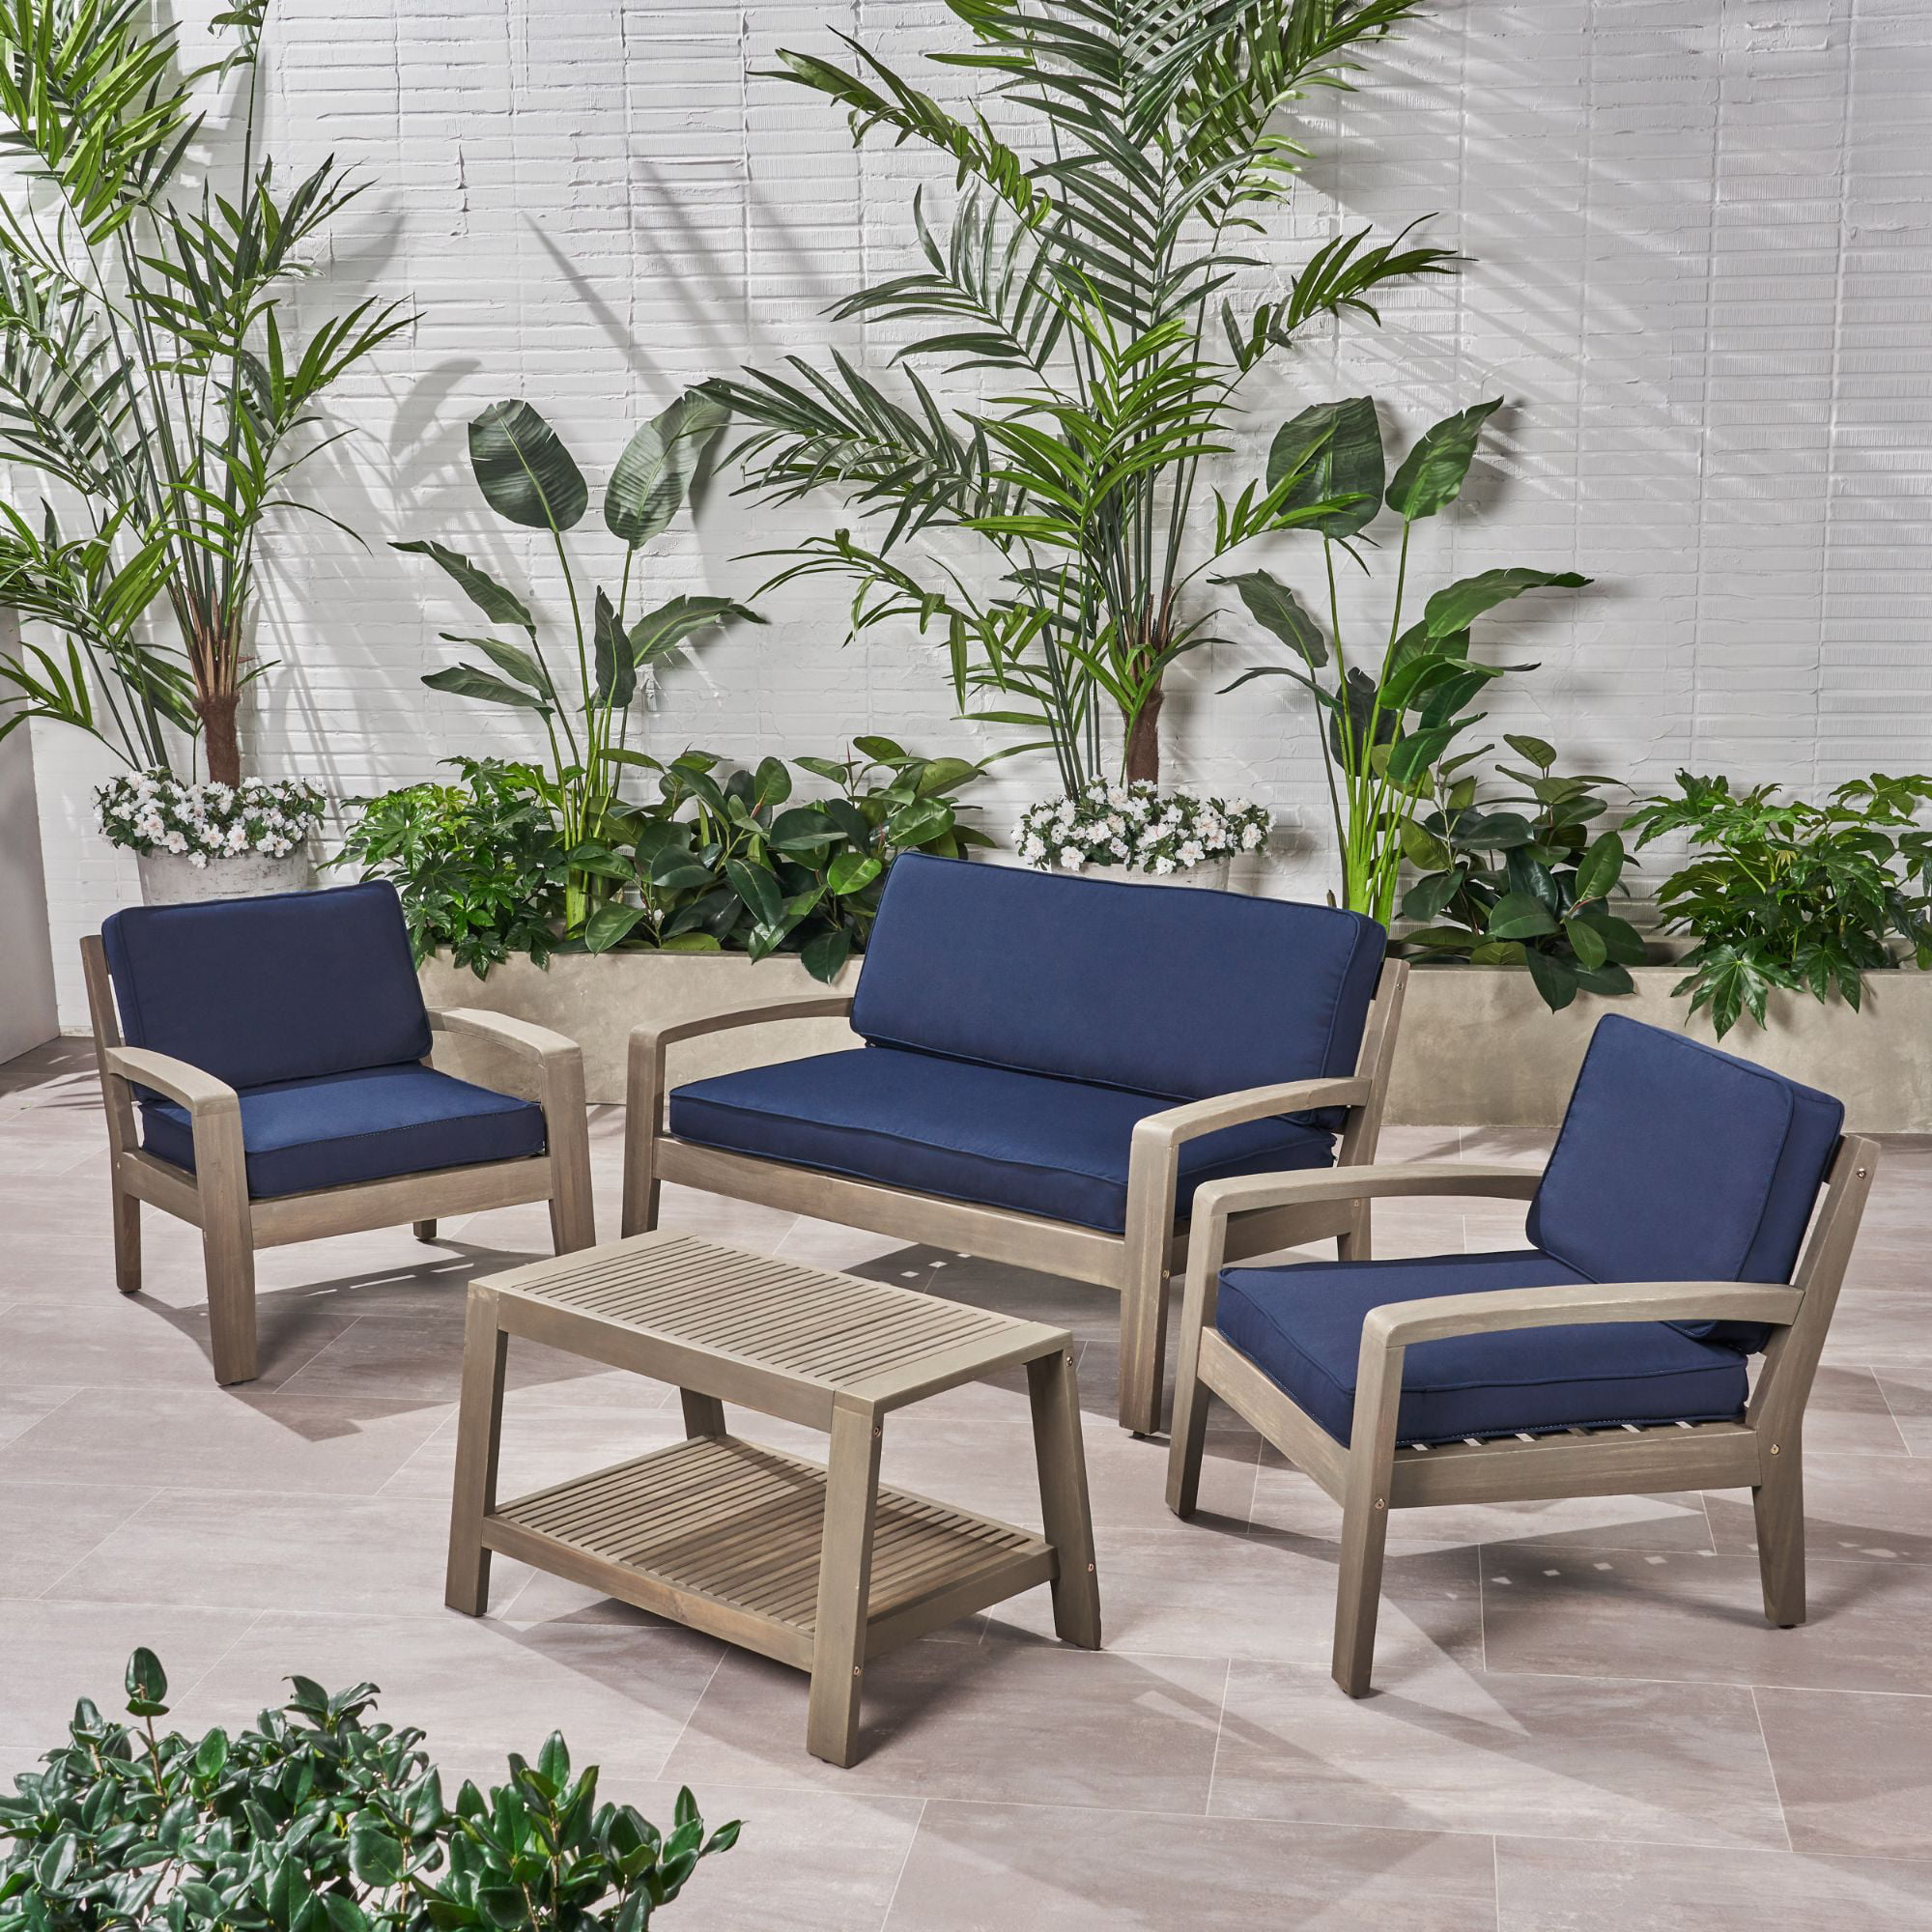 Stylish Patio Conversation Sets For Outdoor Lounging